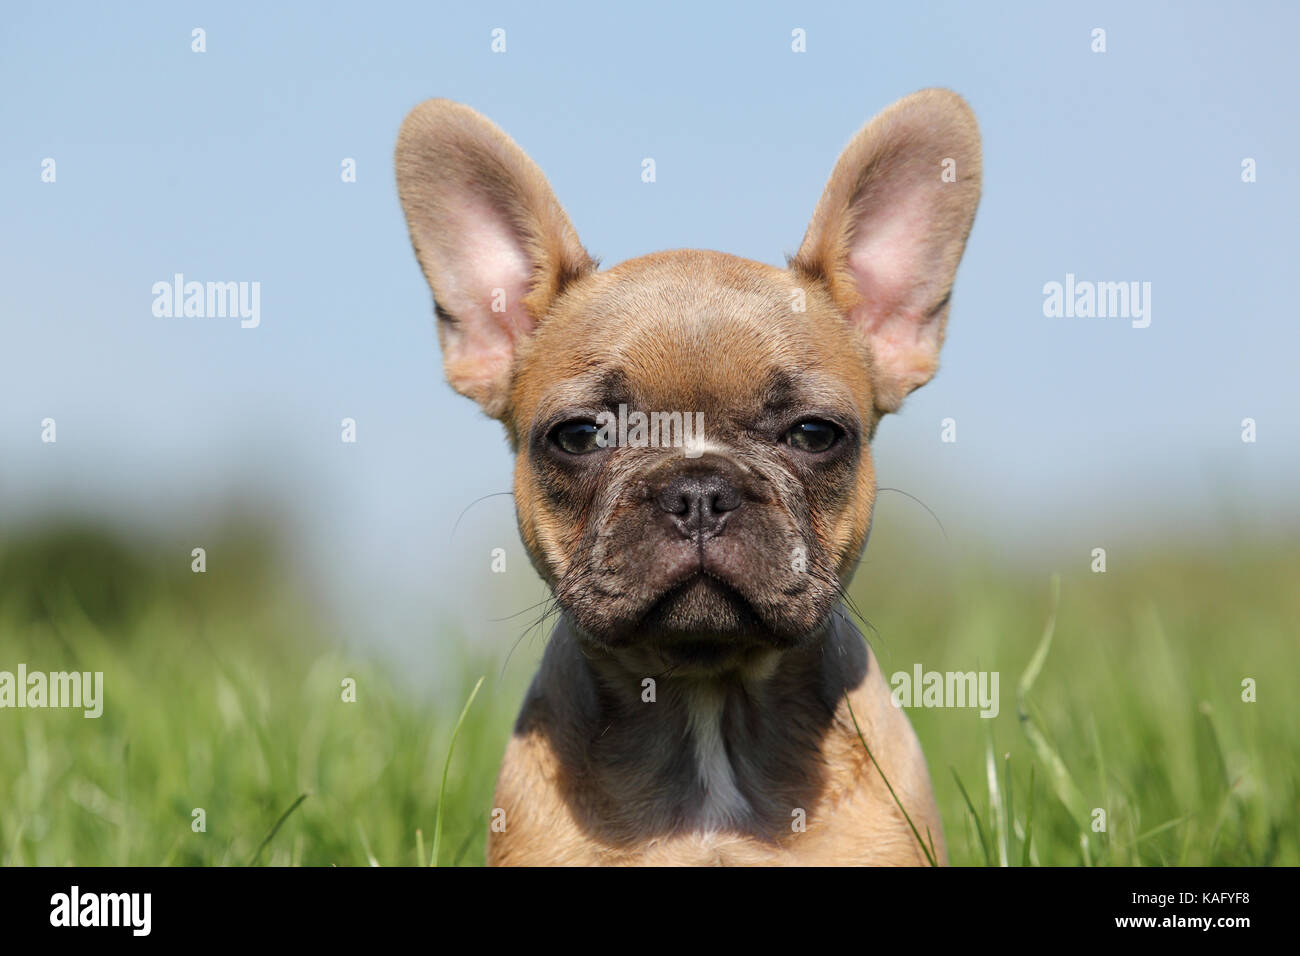 French Bulldog. Puppy (6 weeks old) standing in grass, portrait. Germany Stock Photo